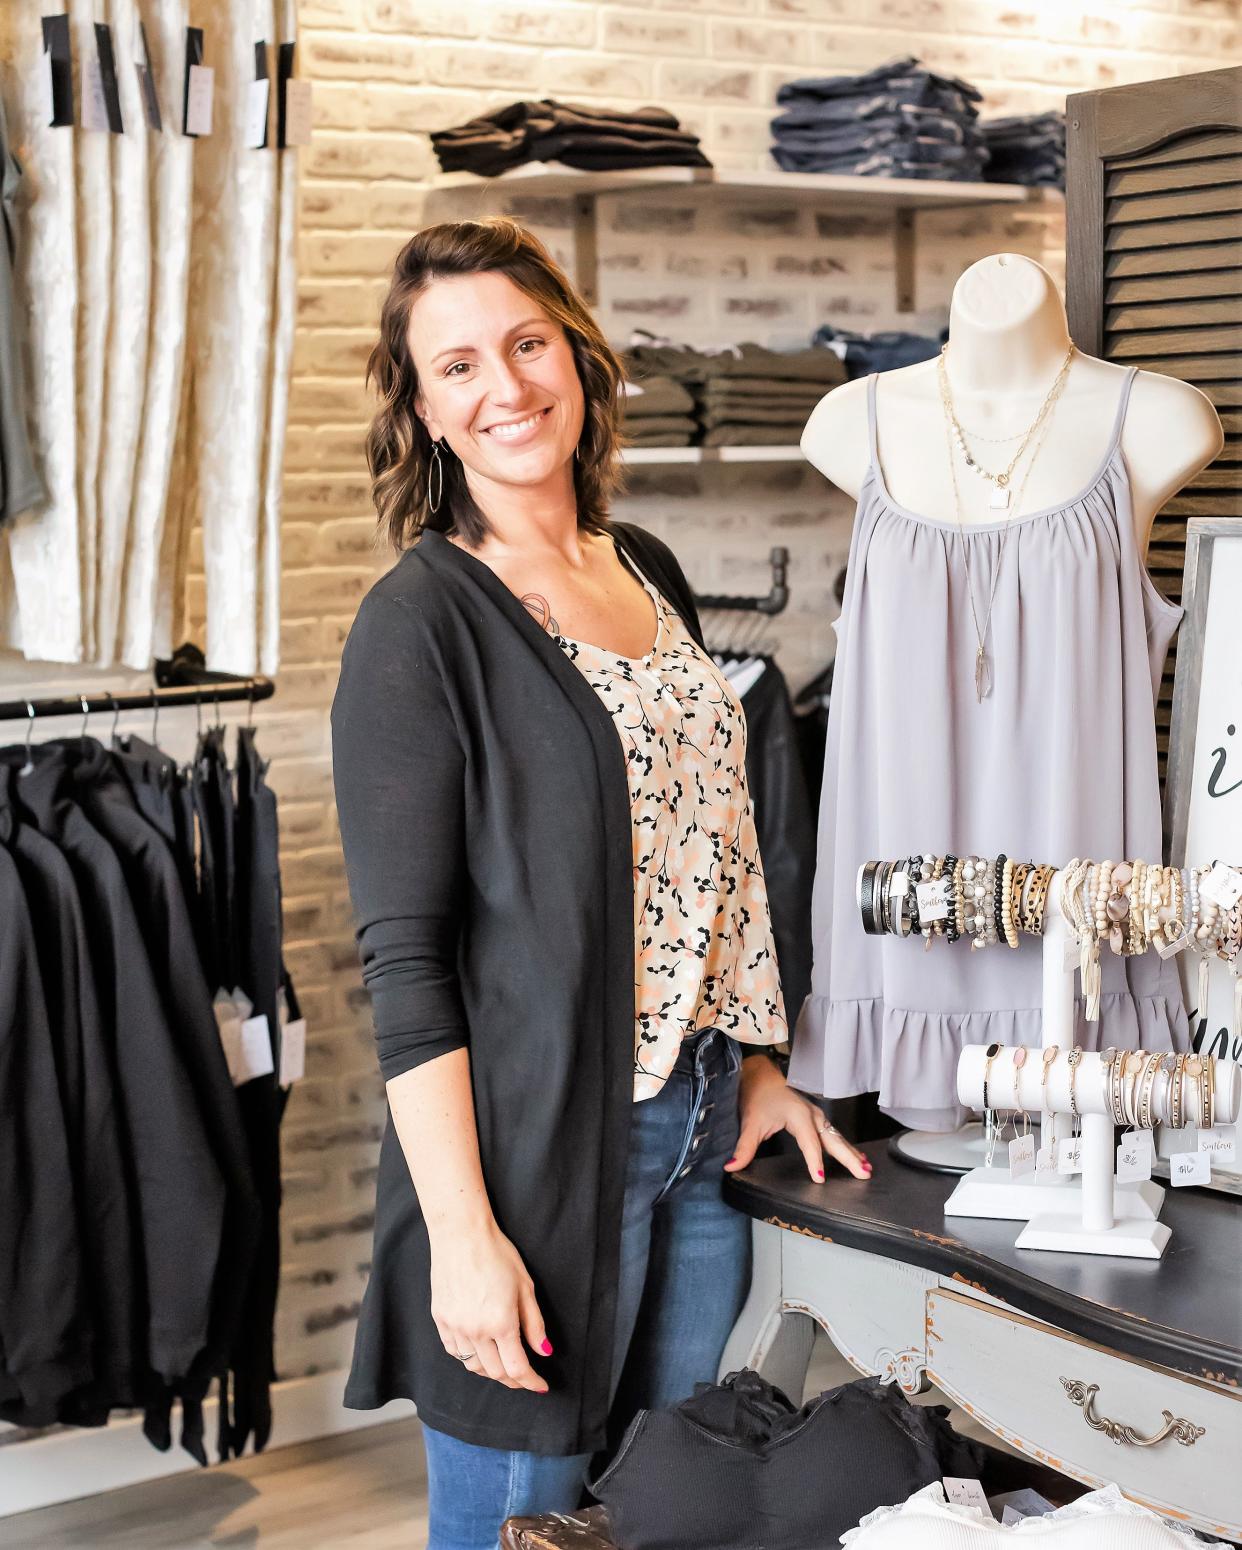 Magan Holz, owner of Olive + Birch boutique in Oconto, is expanding her shop to sites in Lakewood and Oconto Falls.